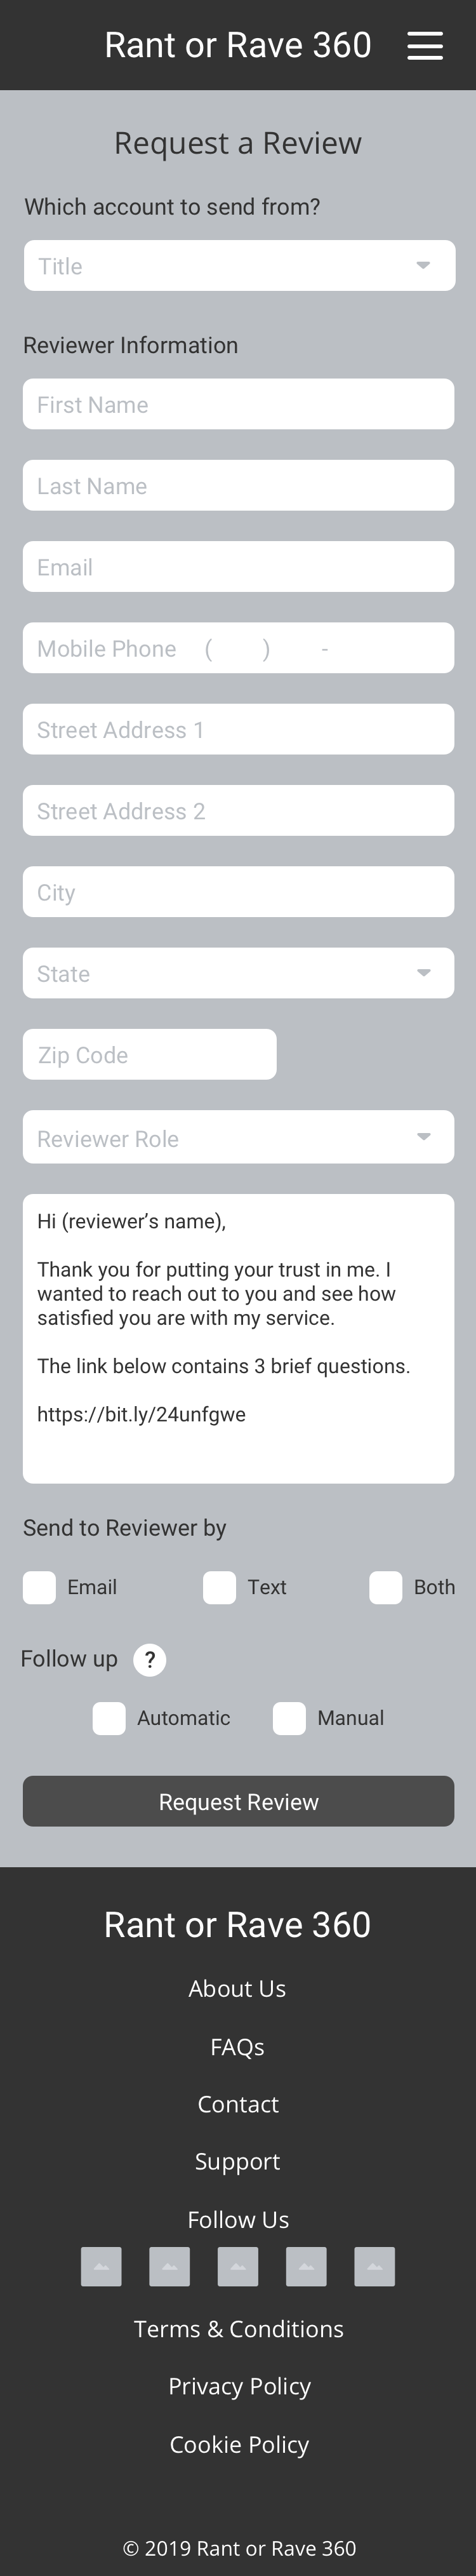 Request a Review screen (wireframe)